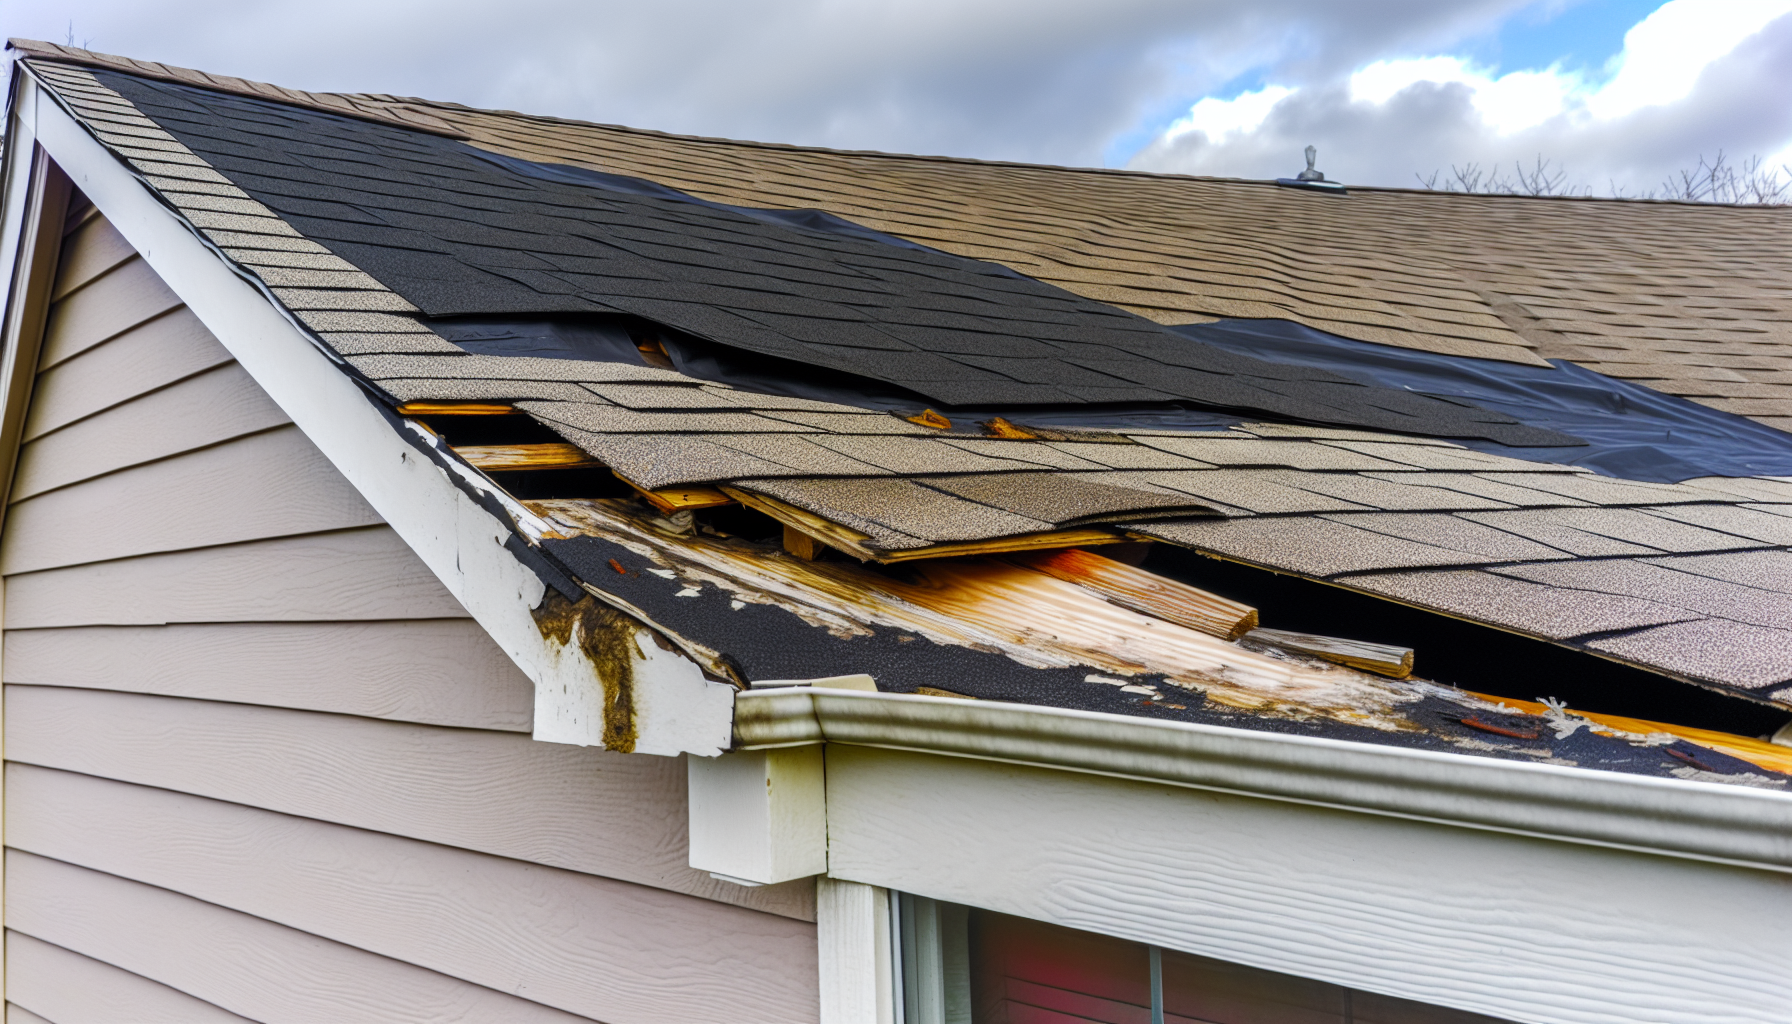 Common roof problems including missing or damaged shingles, leaks, and structural concerns